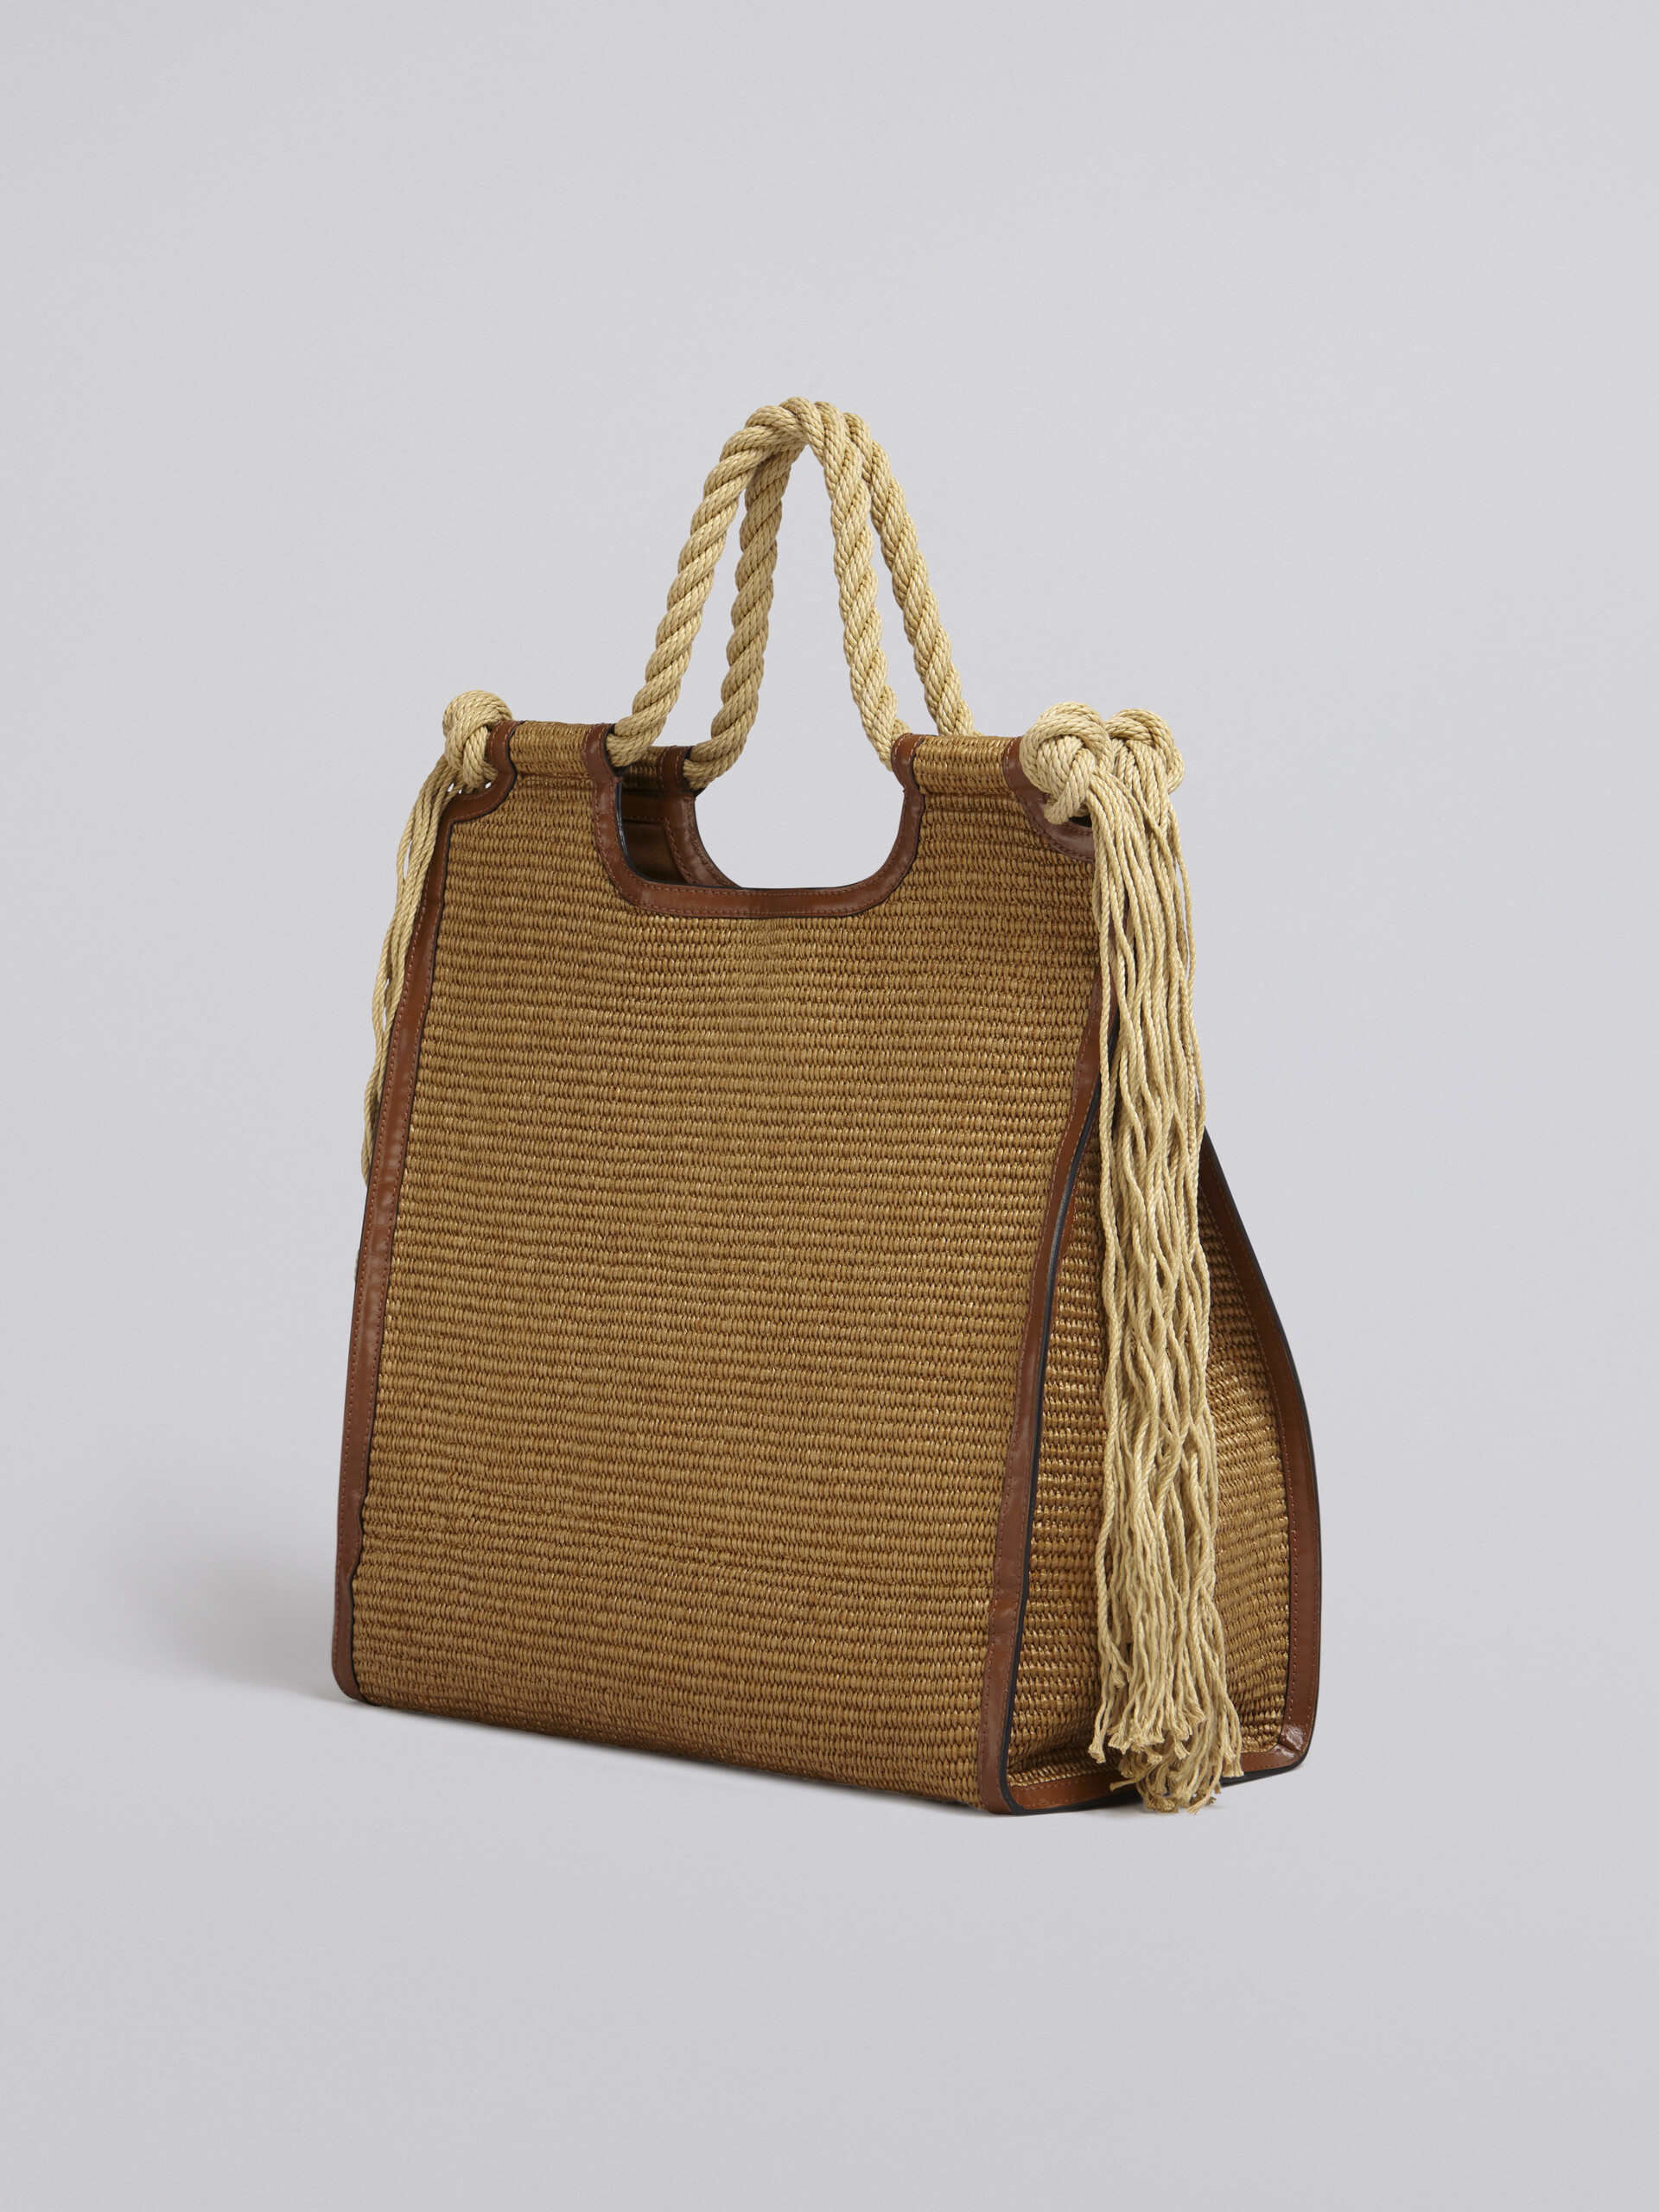 Marcel summer bag in brown leather and raffia with rope handles - Handbags - Image 2